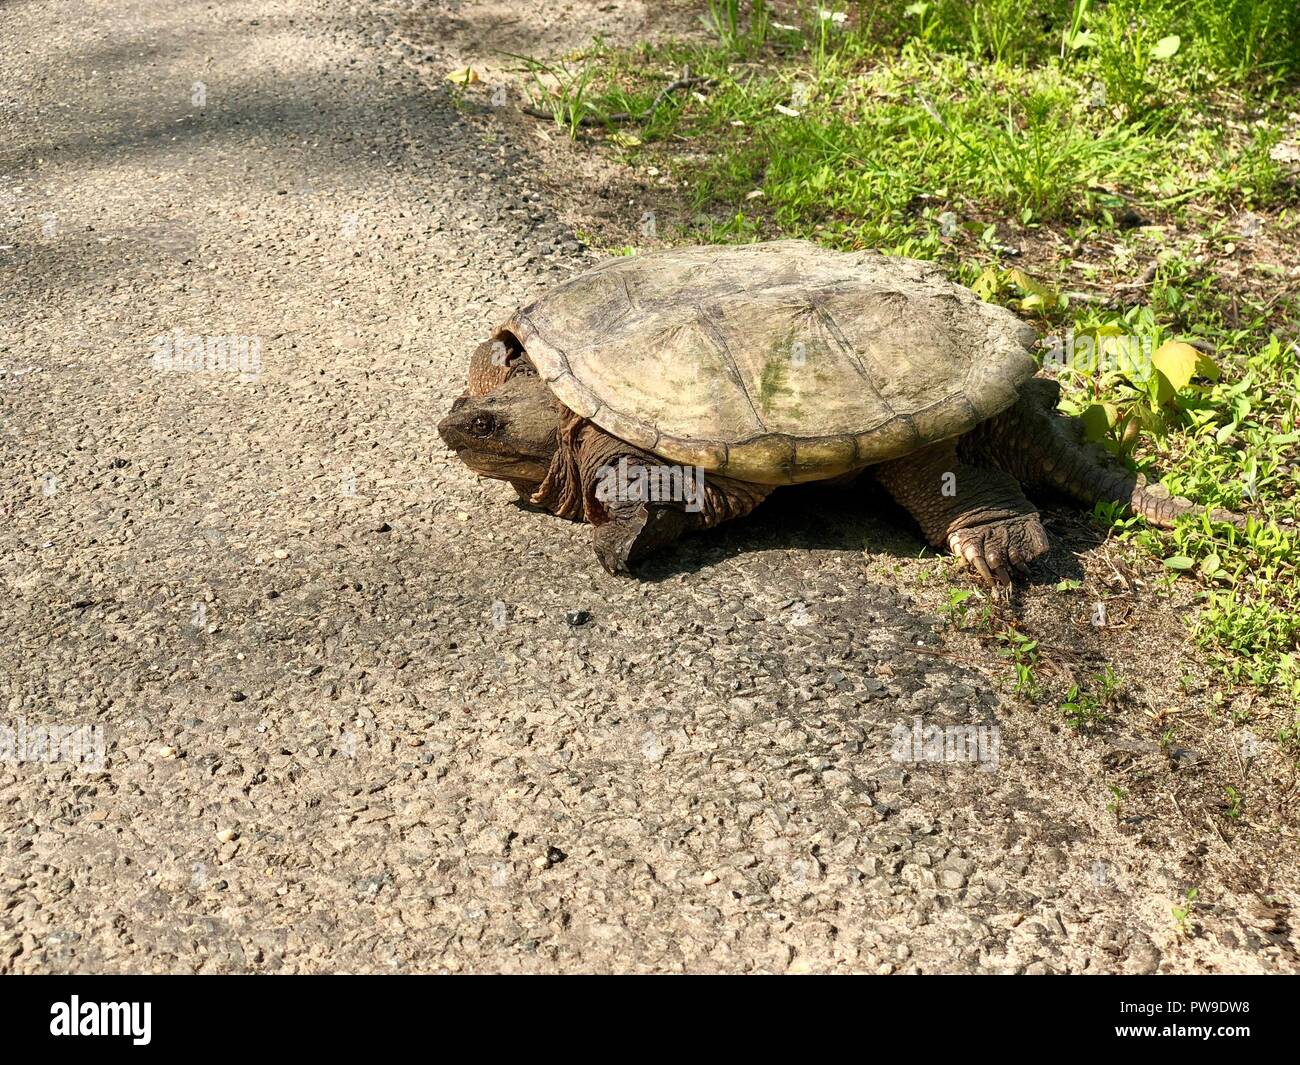 Snapping turtle sitting at the side of a rural road in sunshine Stock Photo